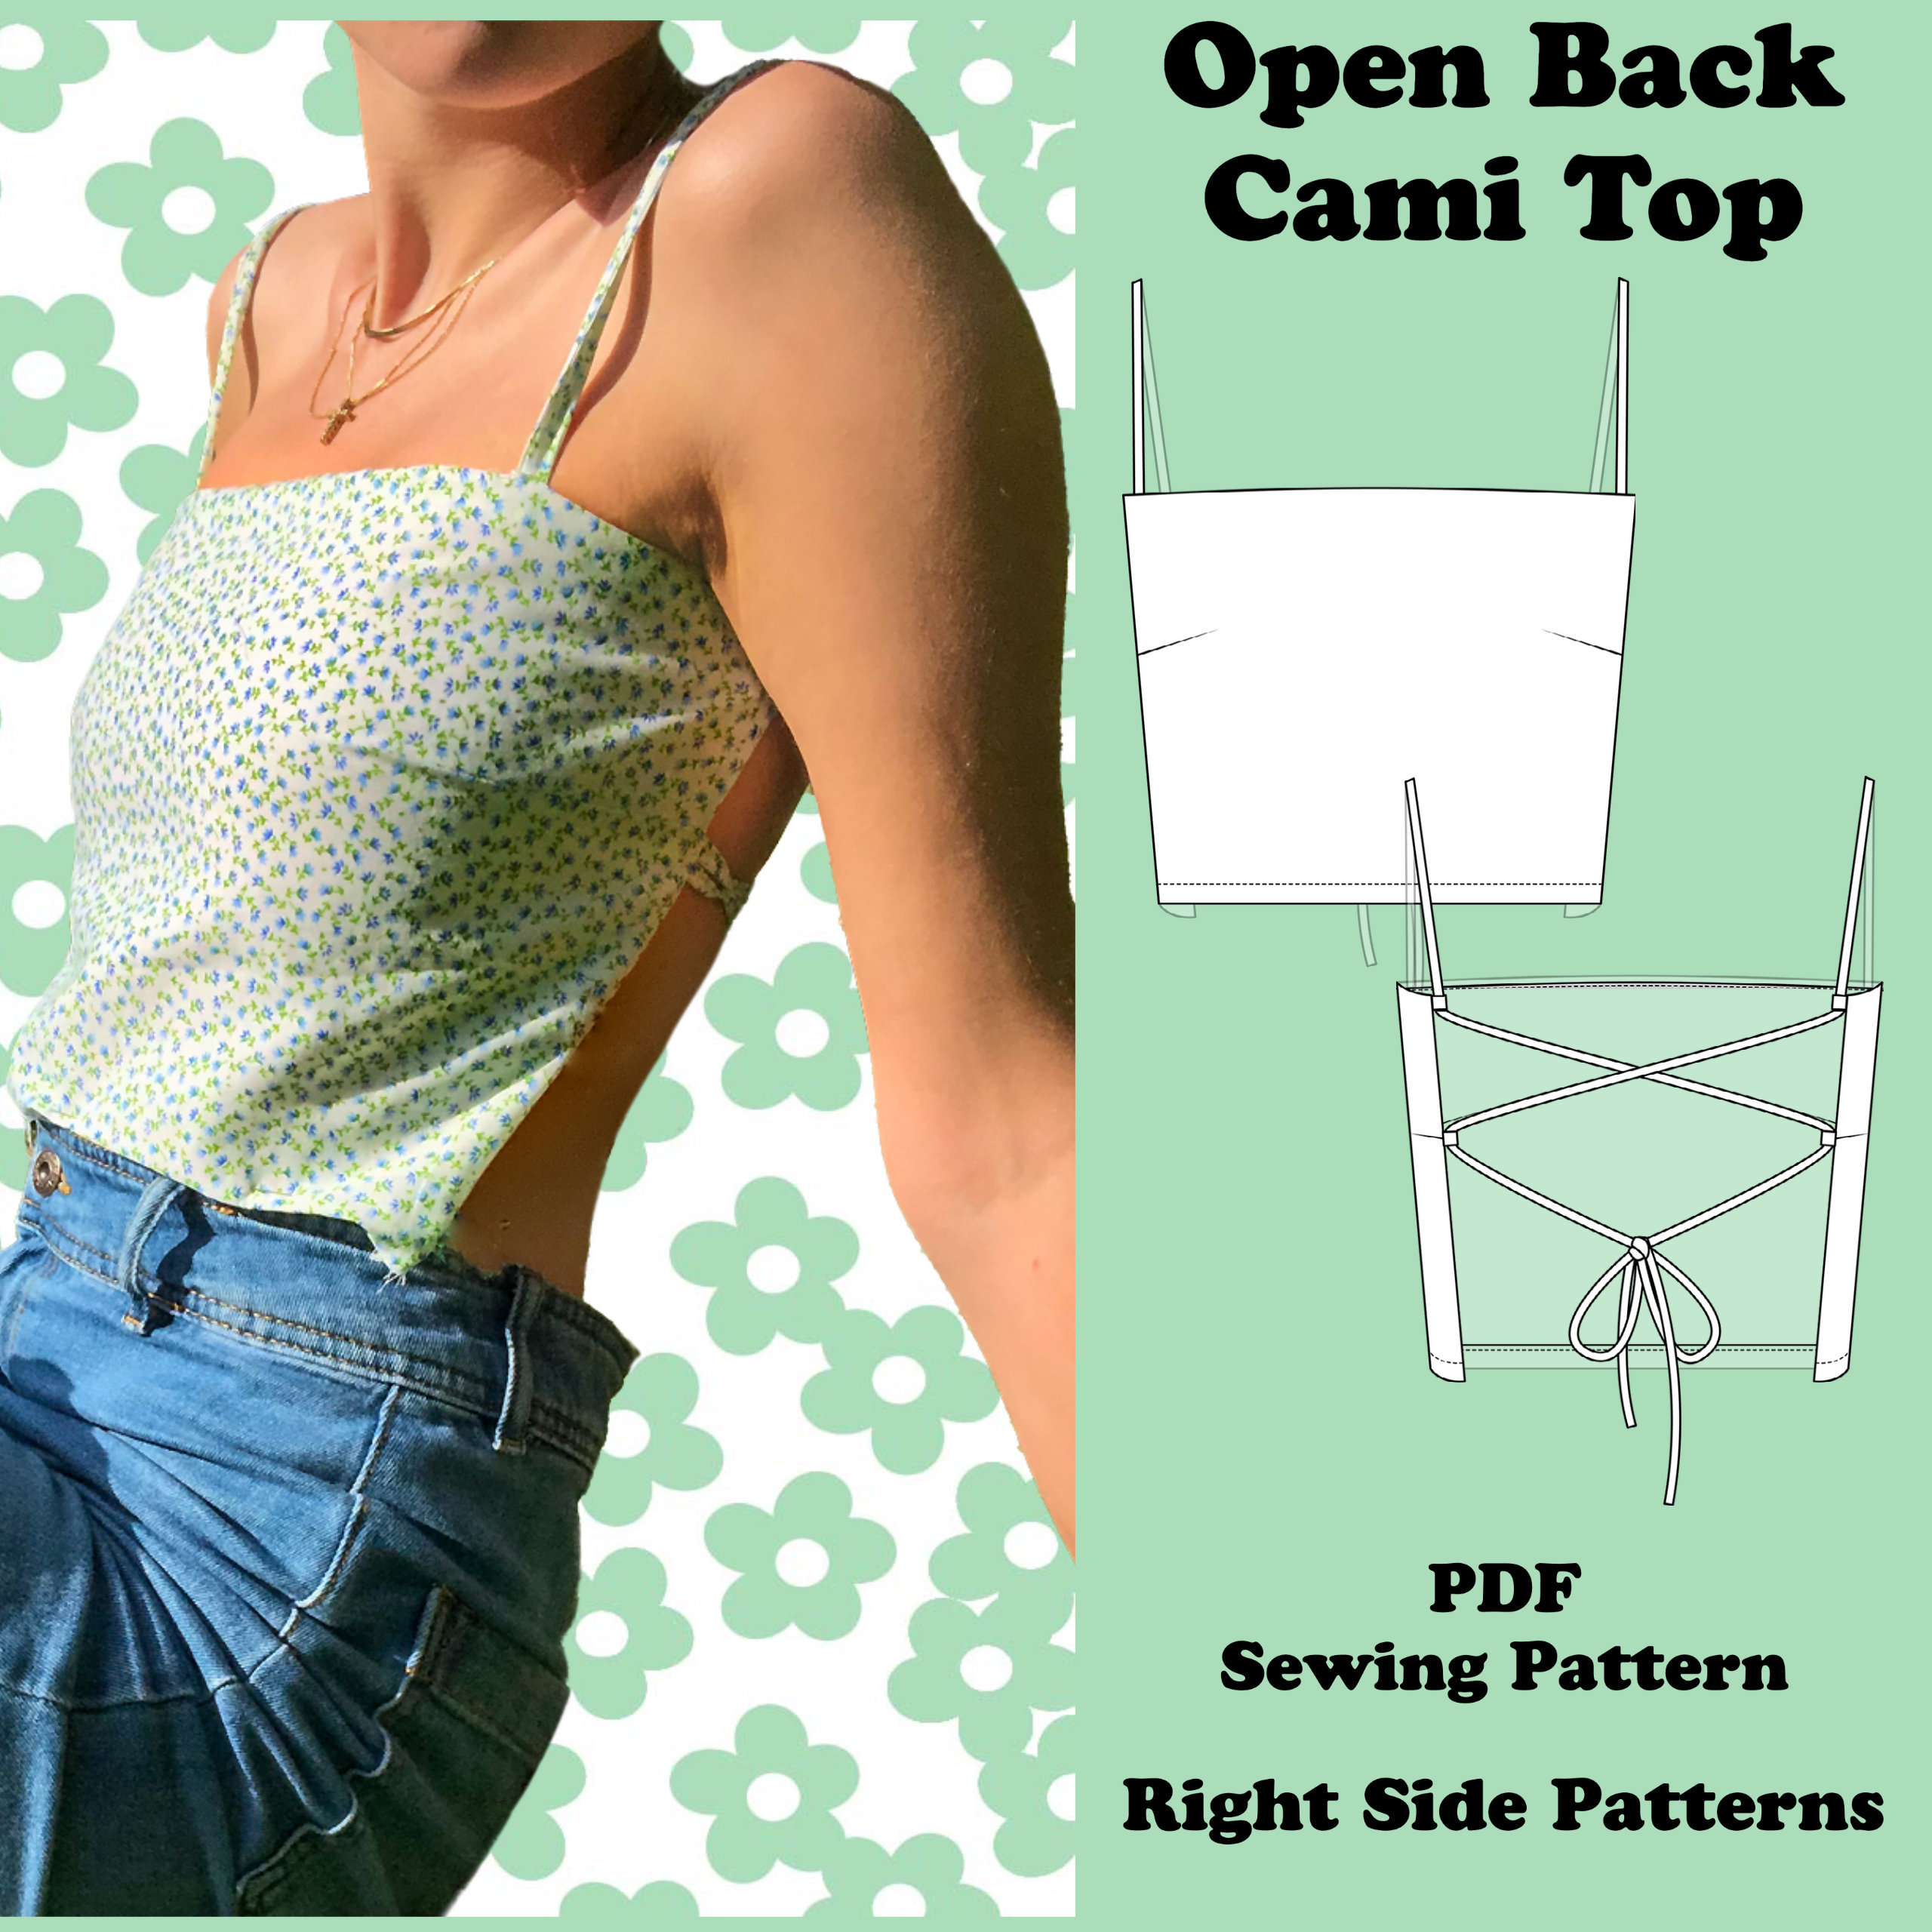 PDF Open Back Crop Top Cami Sewing Pattern Uk Size 6 16 US Size 0 12  Instant Download Print at Home A4, US Letter 